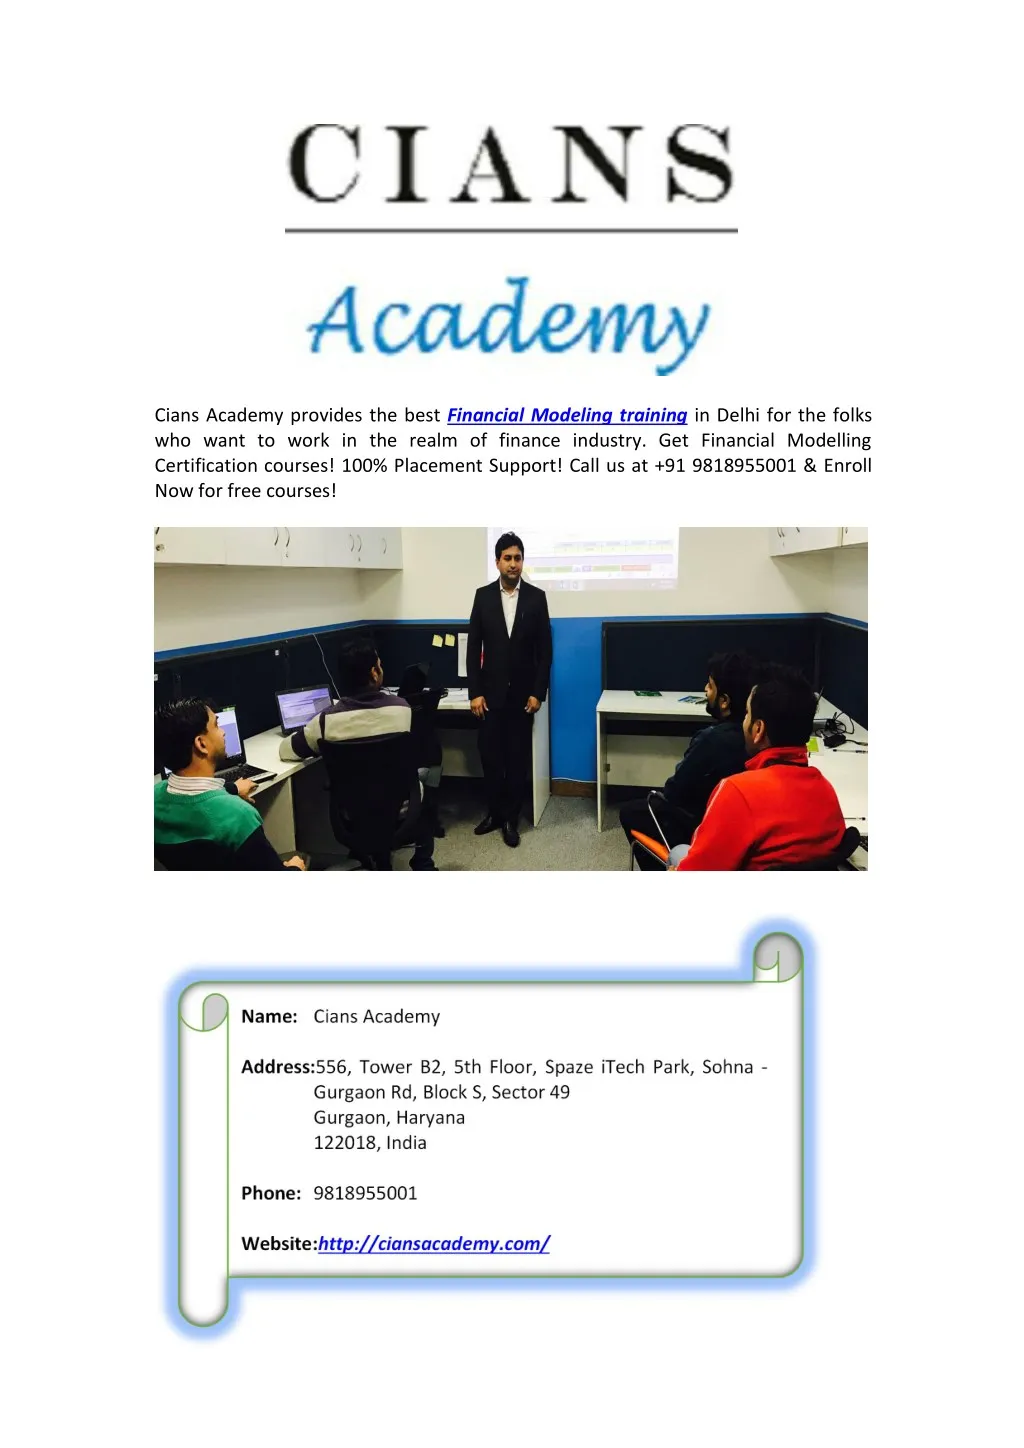 cians academy provides the best financial